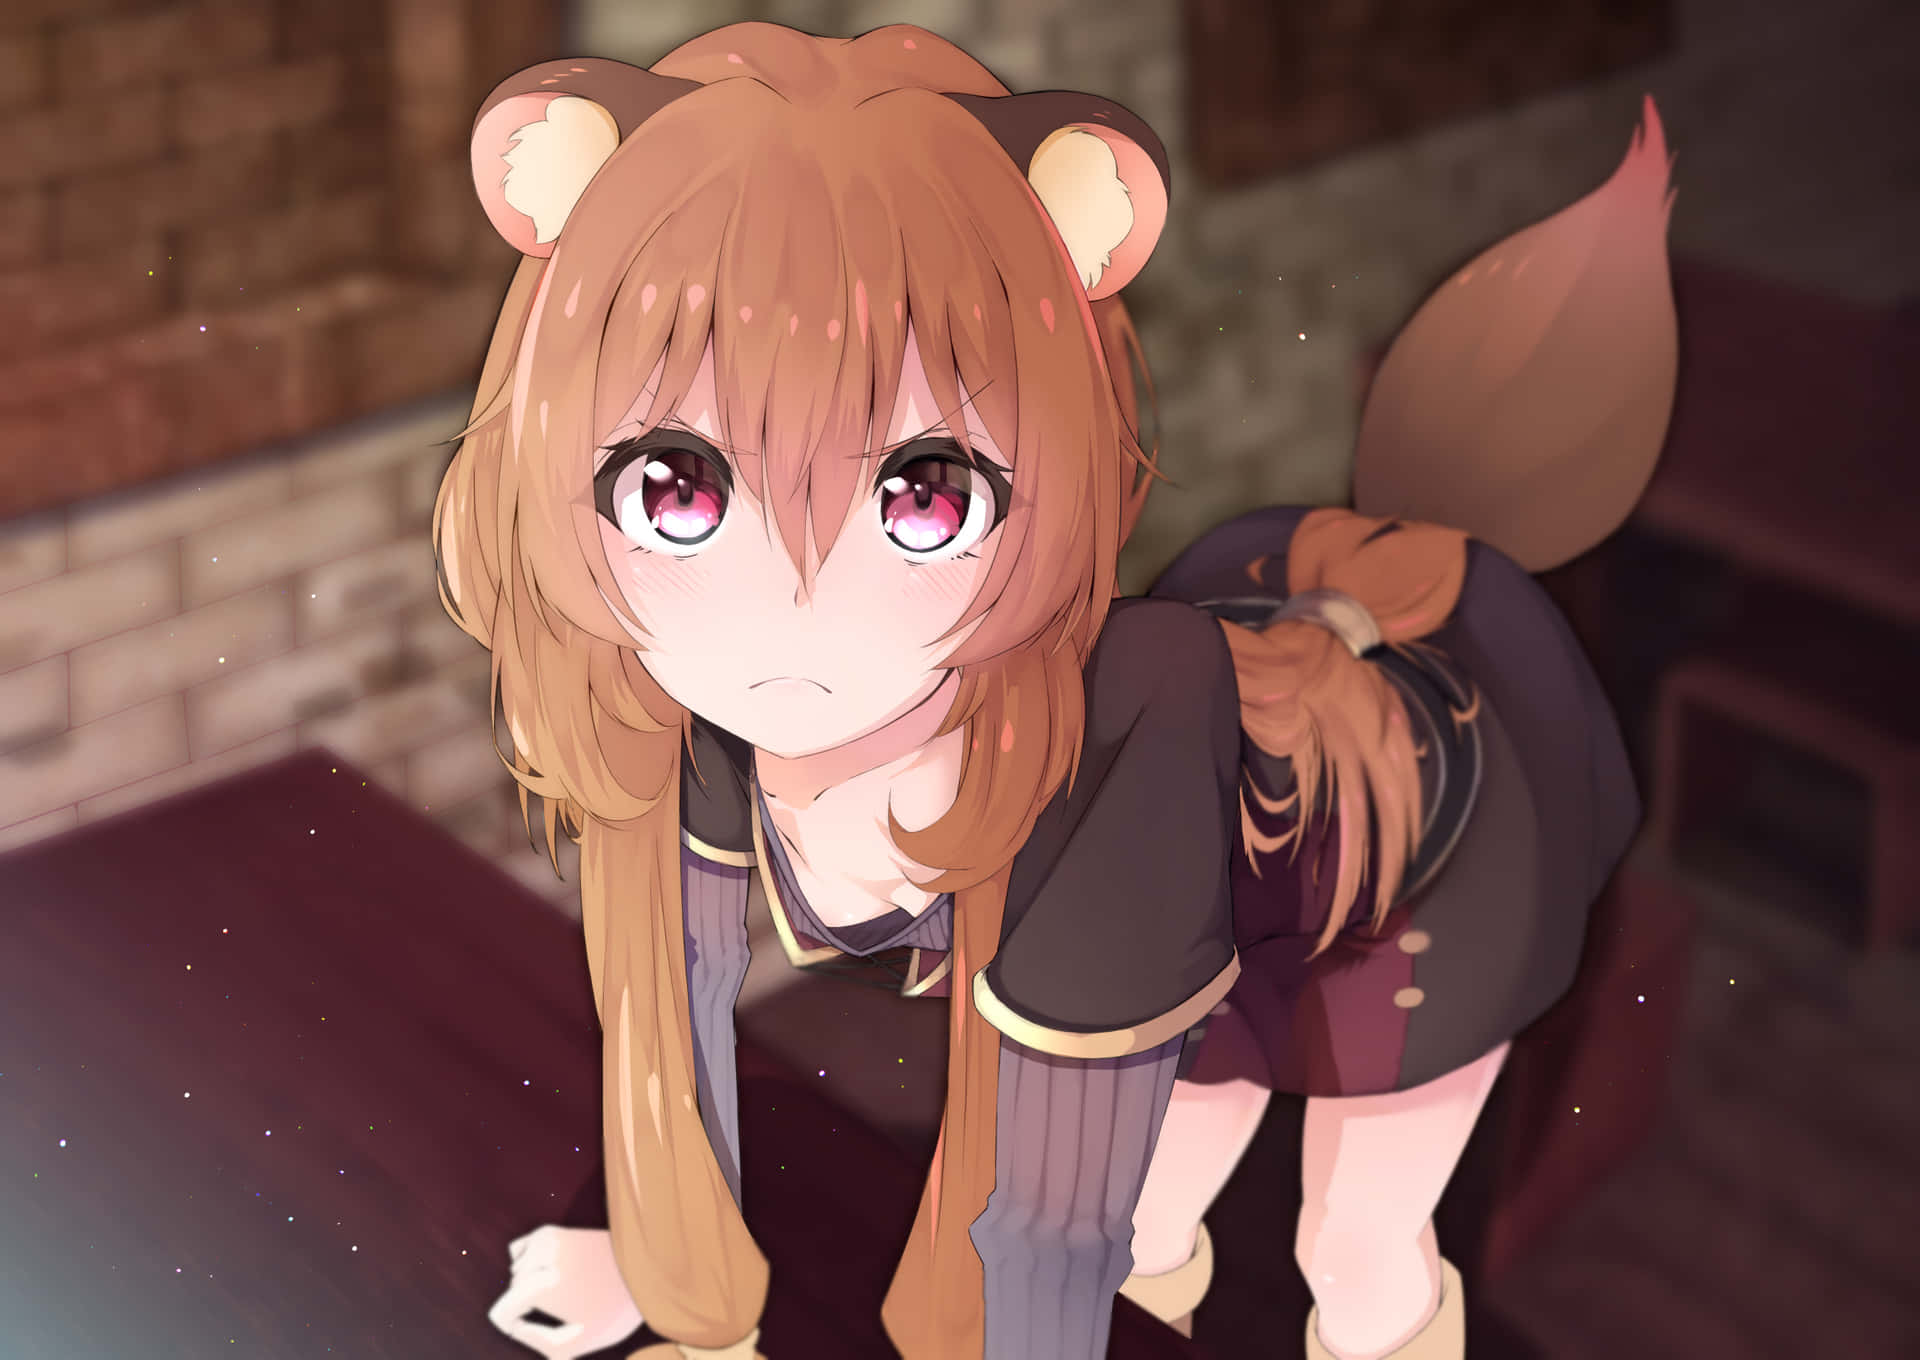 Protect yourself from danger with the Shield Hero!